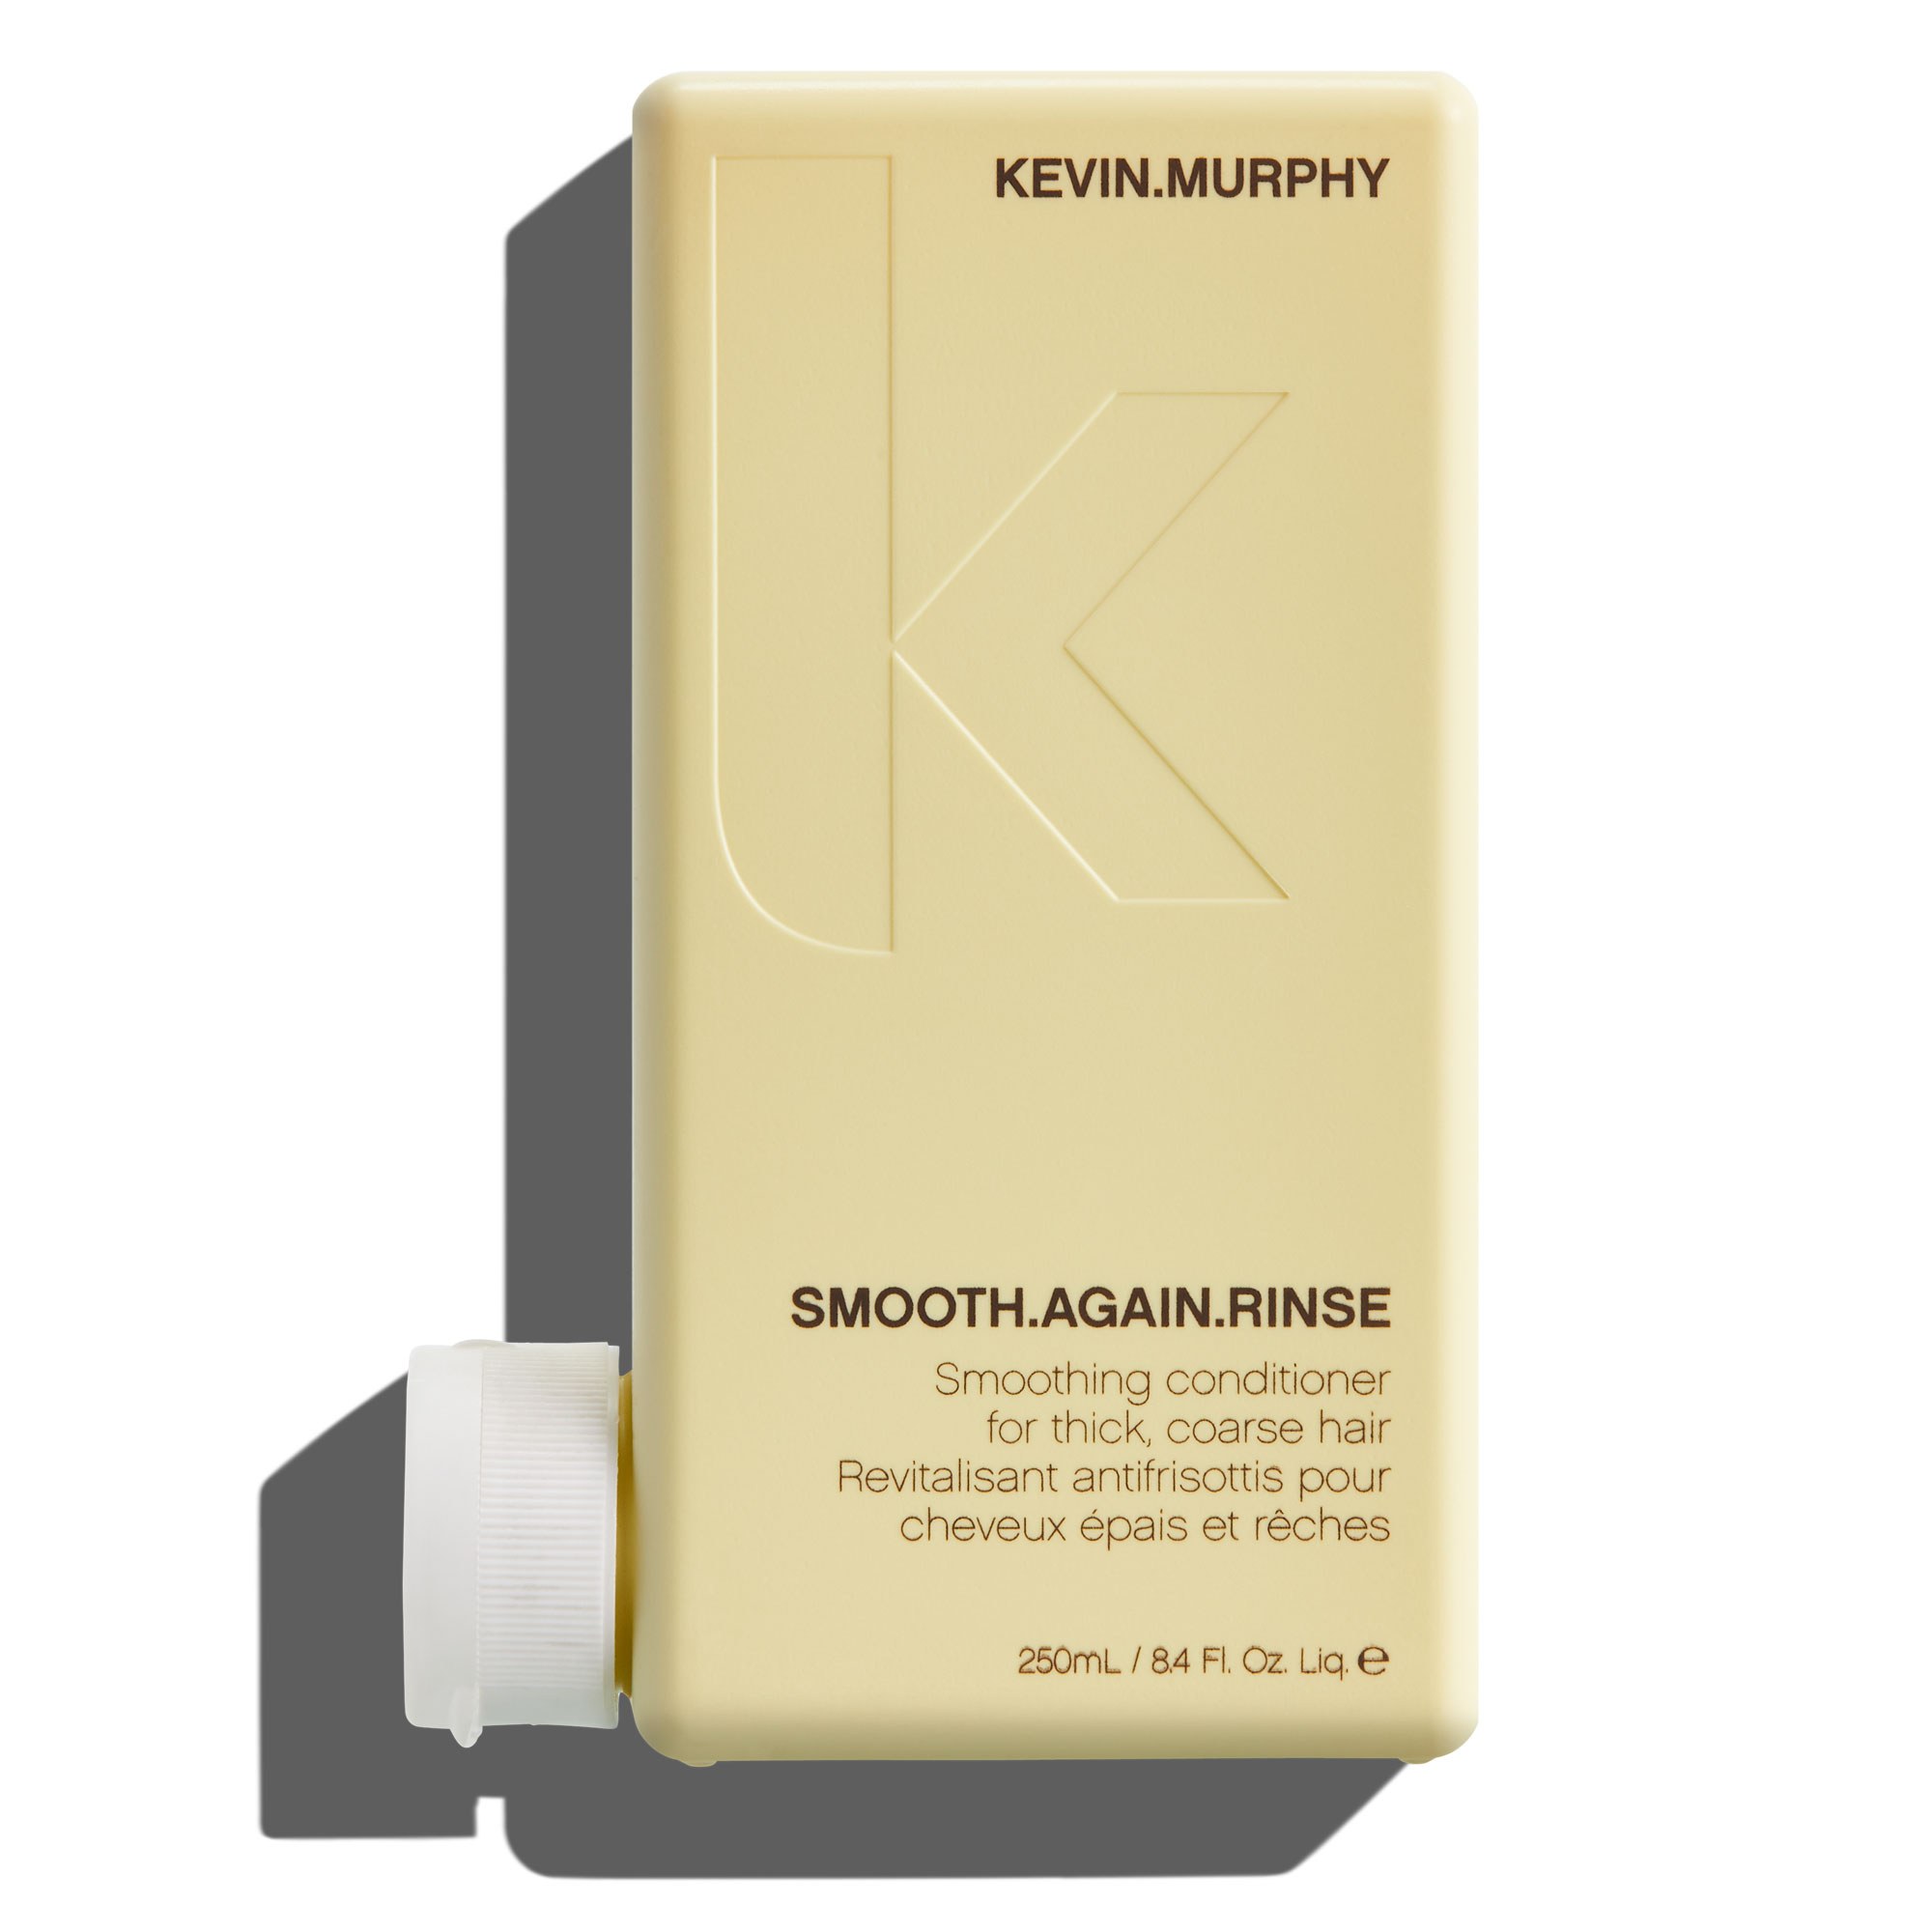 KEVIN.MURPHY SMOOTH.AGAIN Rinse 8.4oz